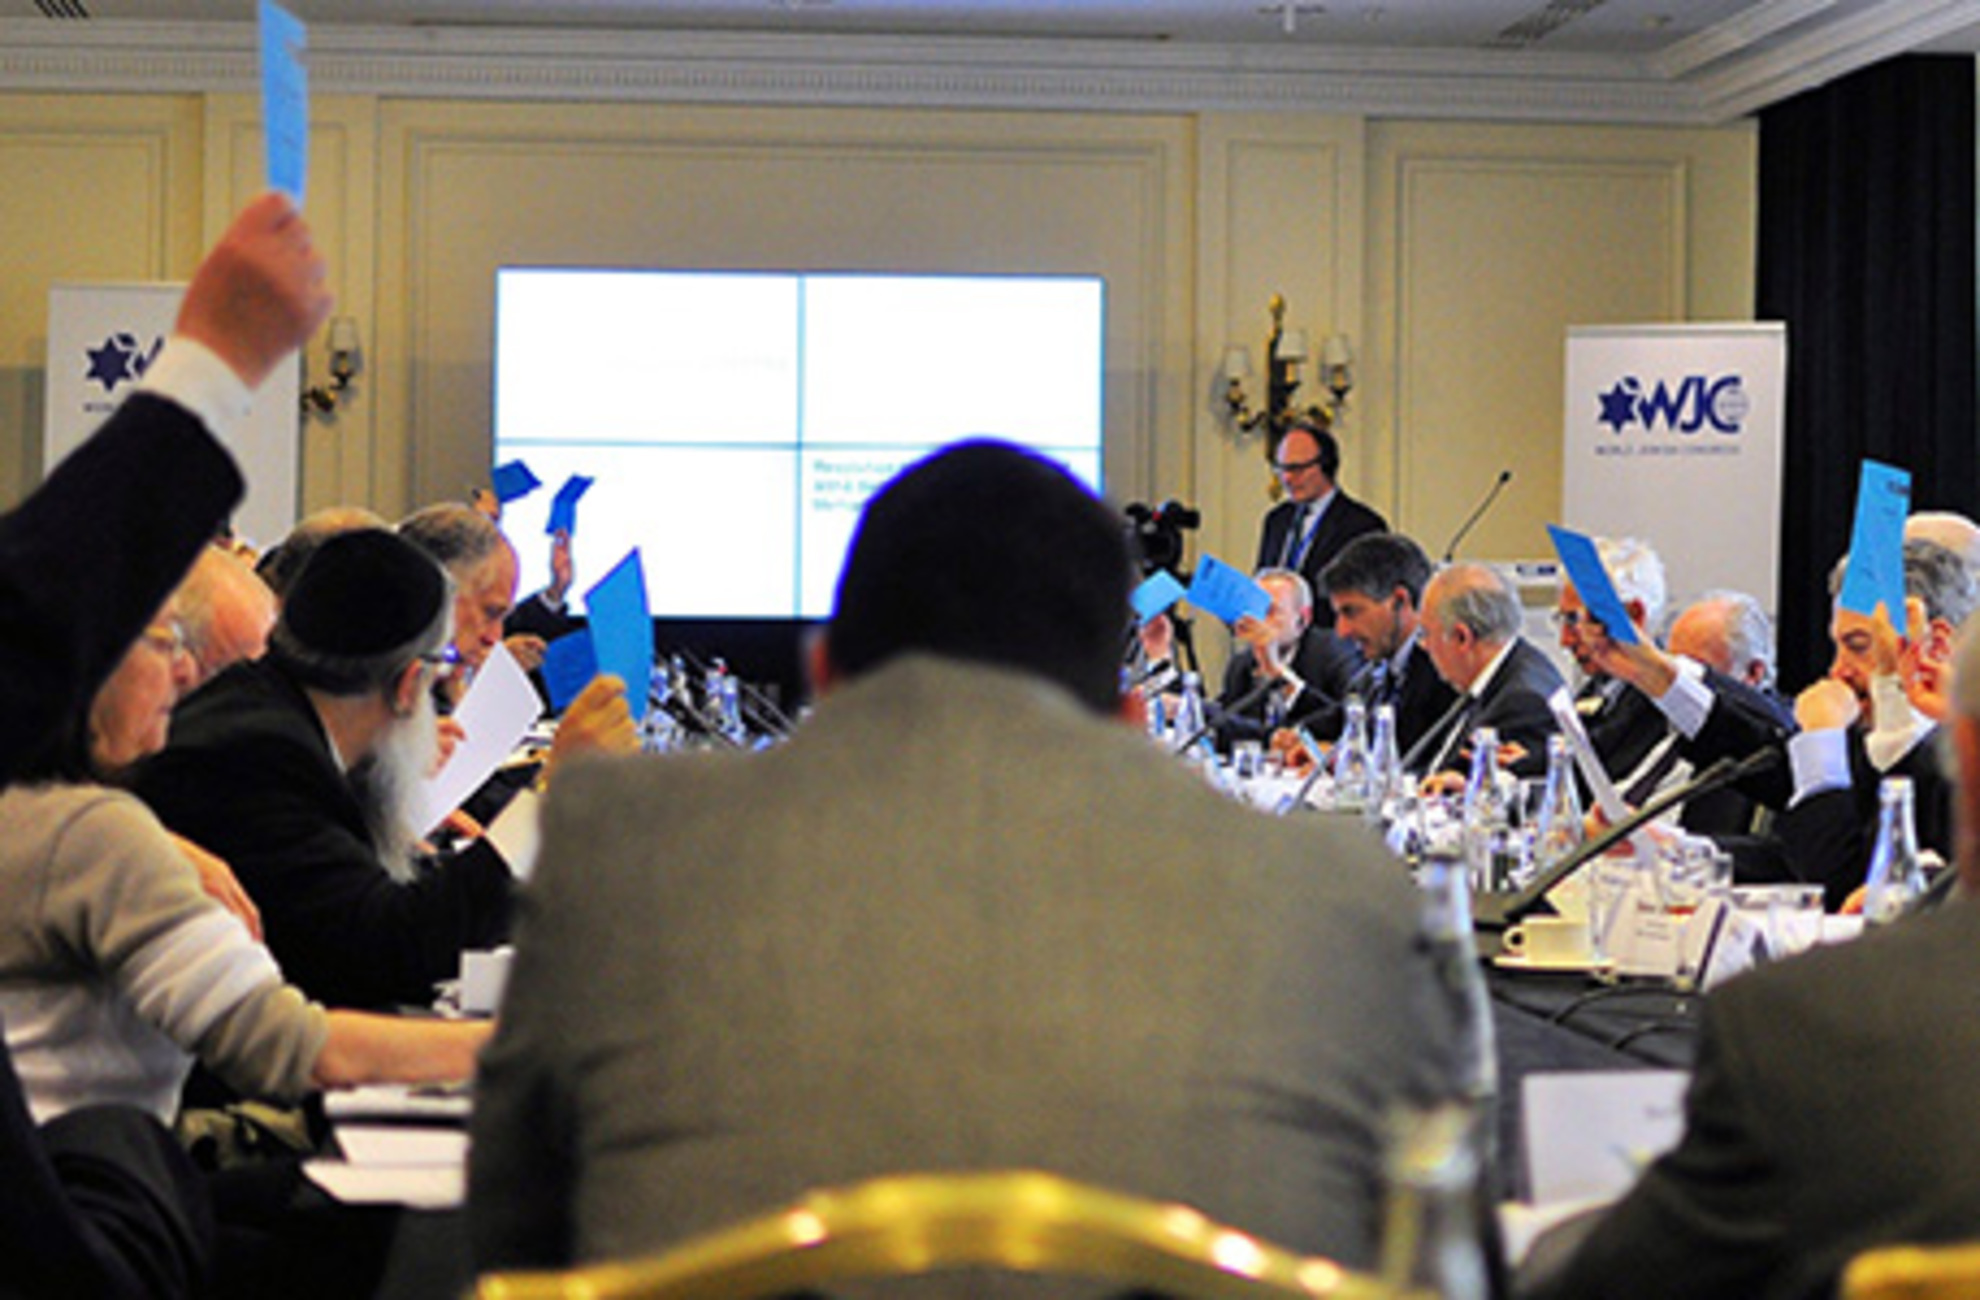 WJC Executive Committee Meeting, 30 March - 01 April 2014